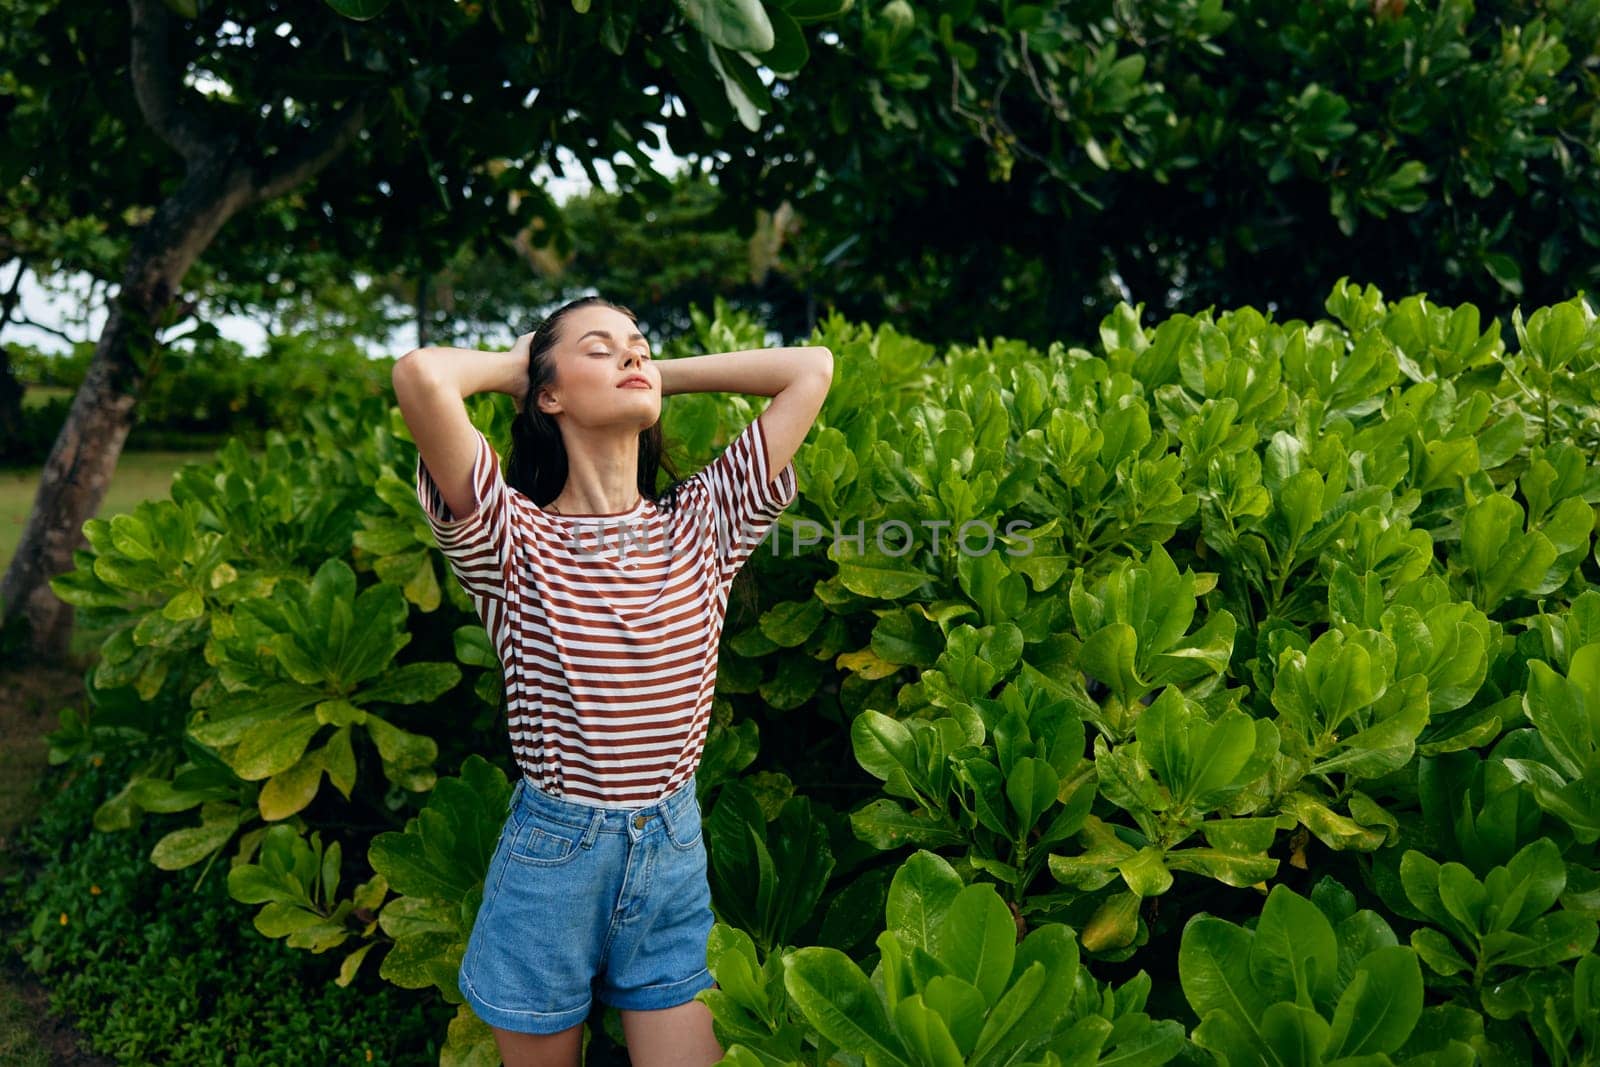 woman t-shirt walk black beautiful portrait face beauty wellness young nature joy lifestyle summer fun sun park exercise hipster freedom smiling